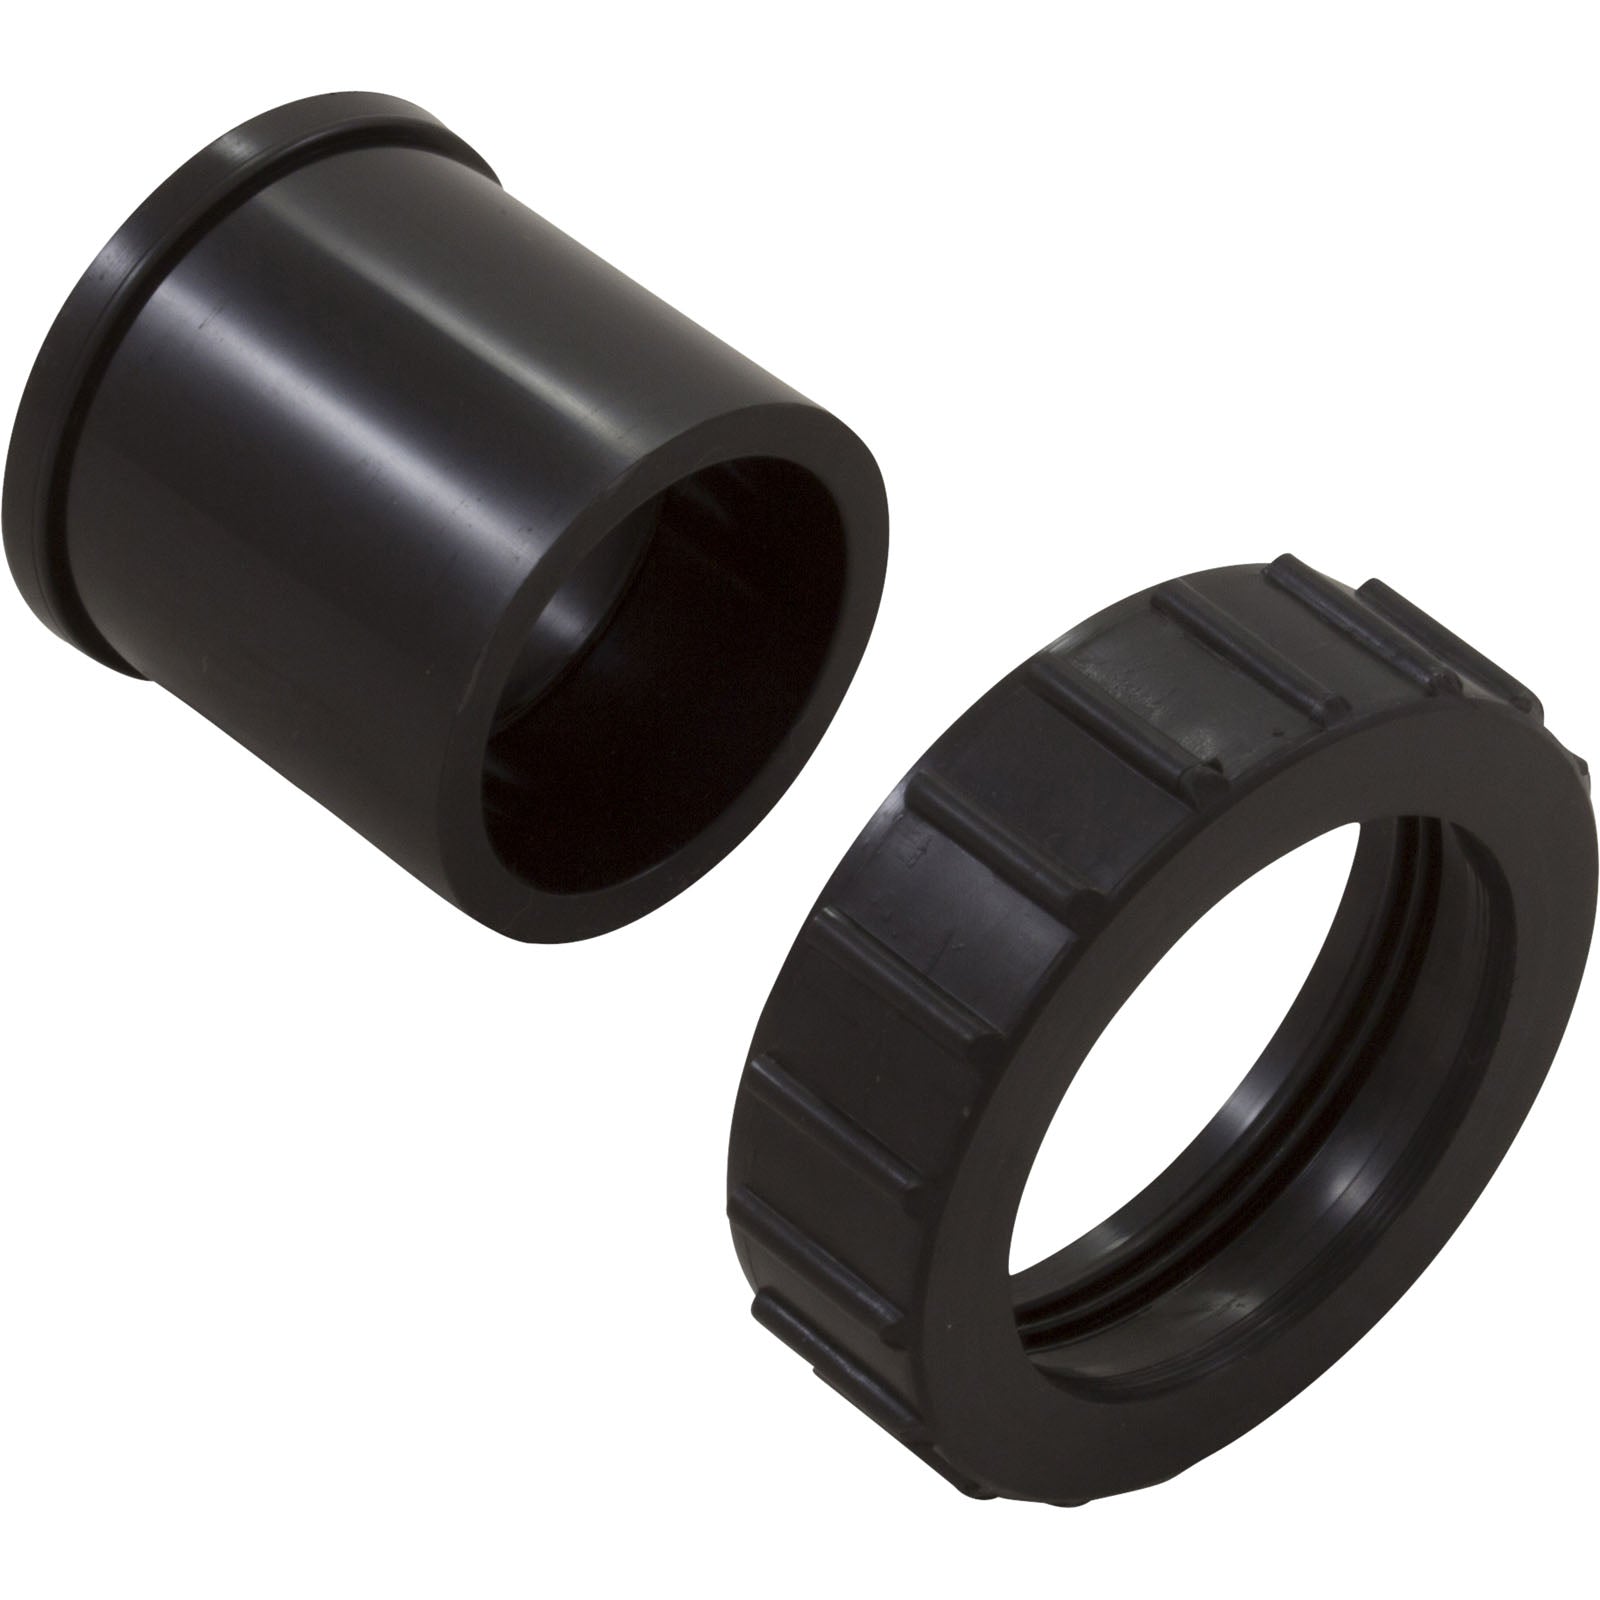 Bulkhead Adapter, Pentair Sta-Rite HRP36, with out O-Ring/ 31B0077